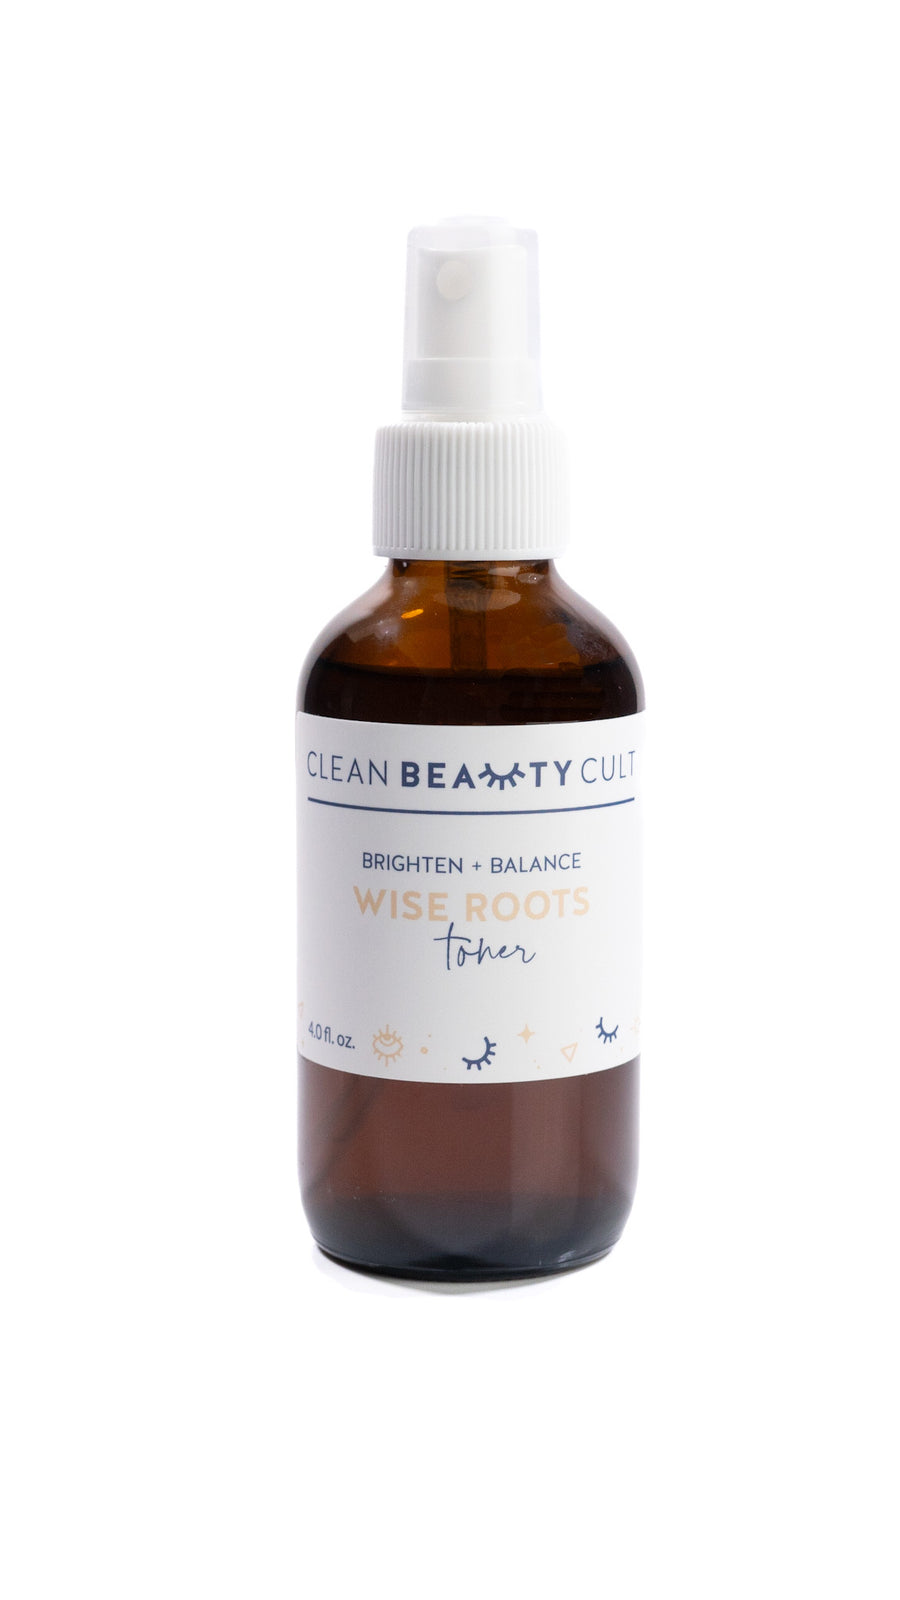 Wise Roots Toner by Clean Beauty Cult